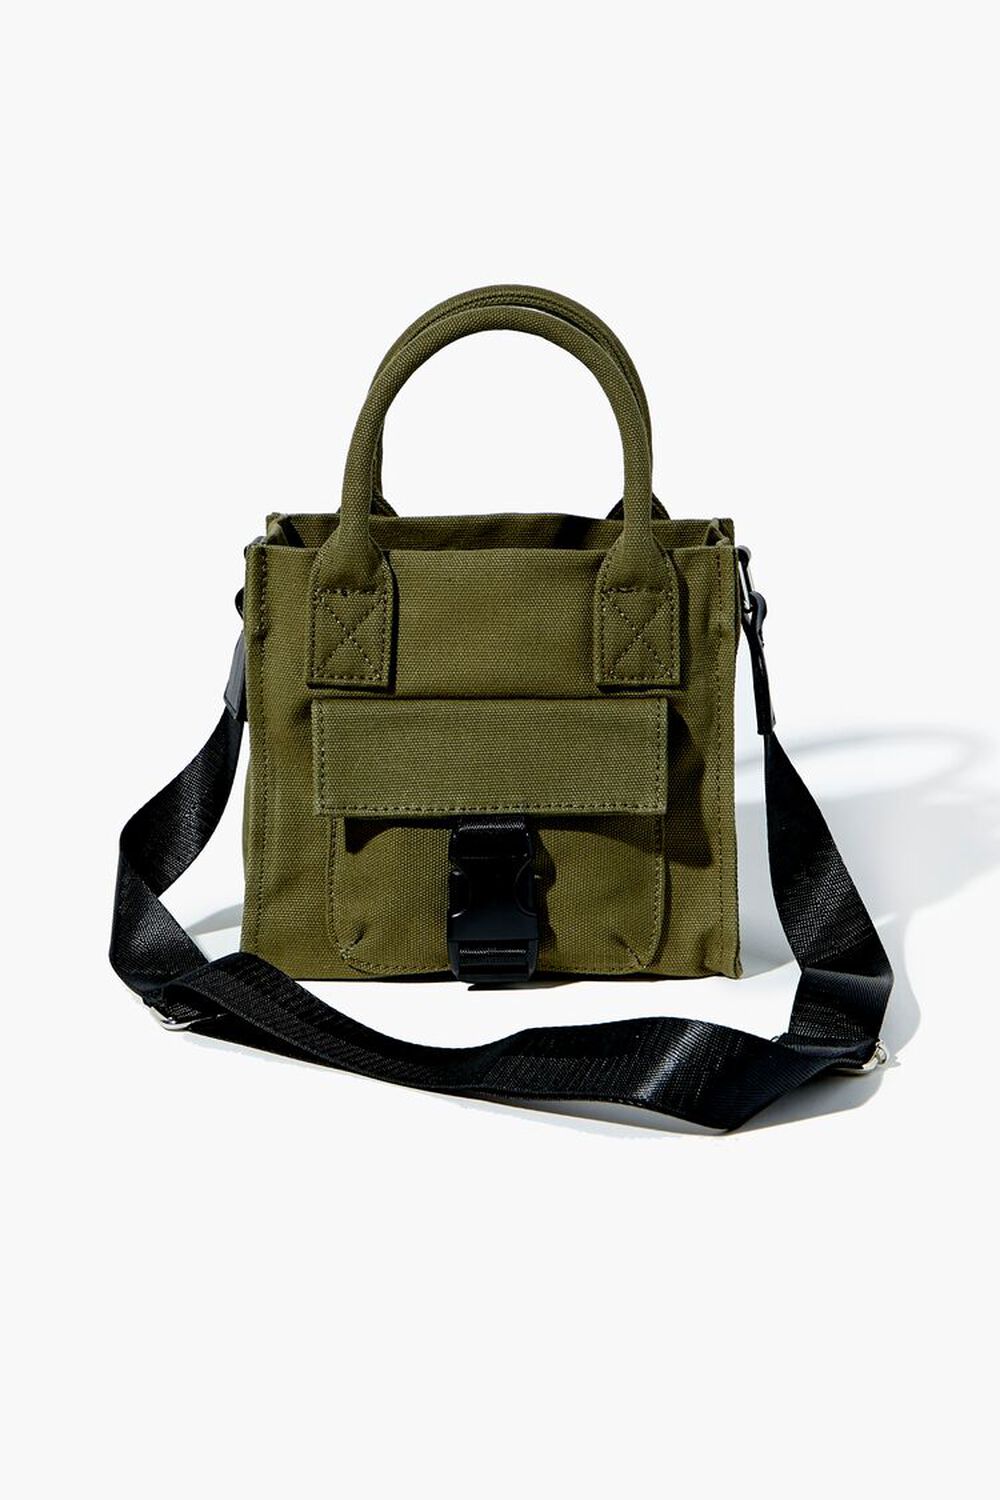 GREEN Canvas Release-Buckle Tote Bag, image 1